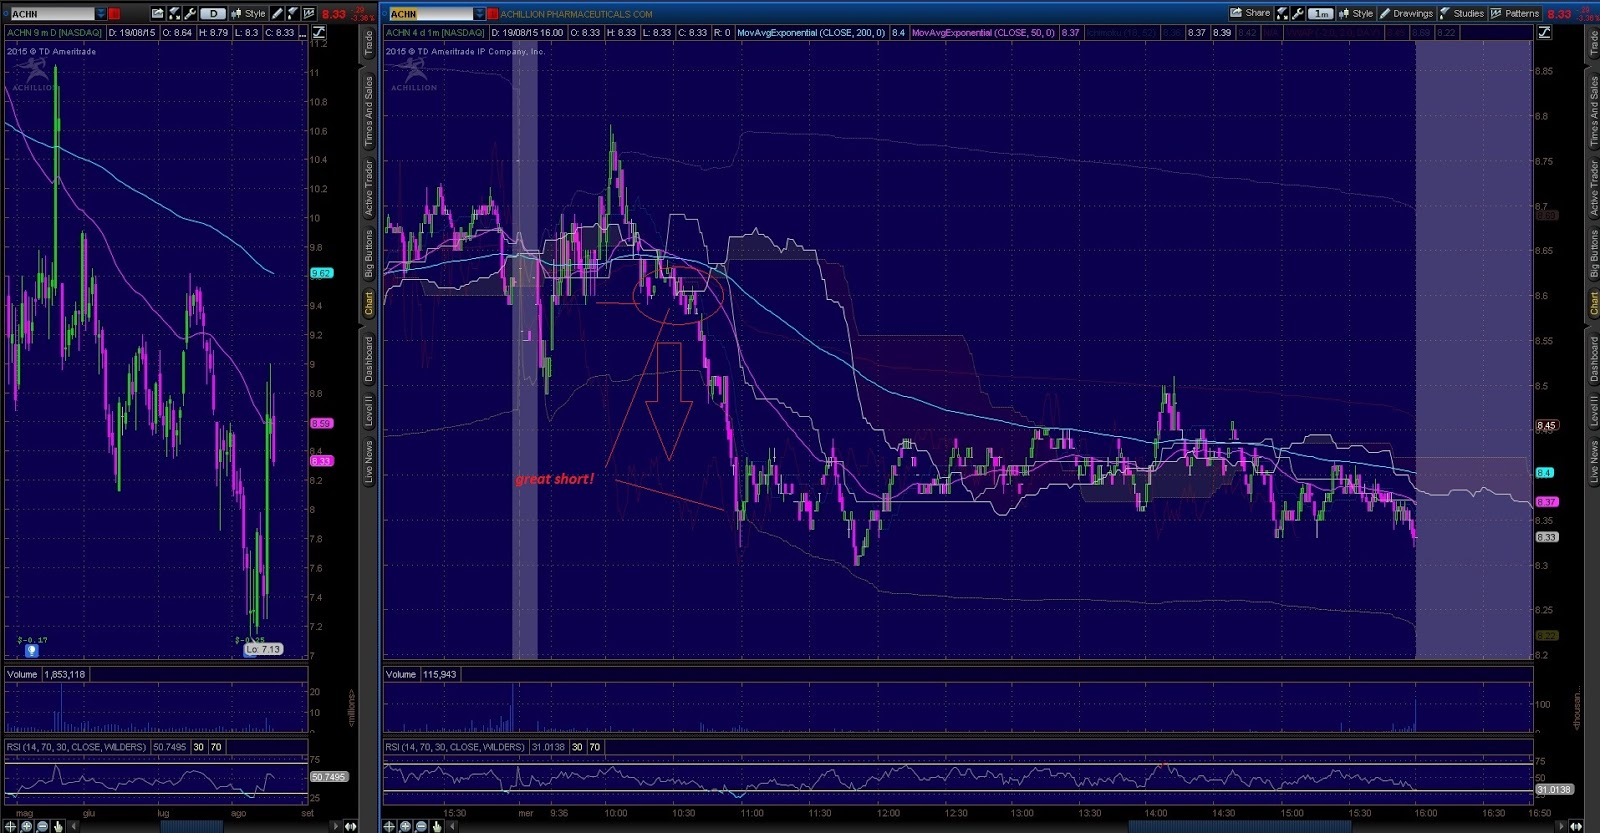 ACHN - SSeM after morning spike on over-extention like P&D (19-08)